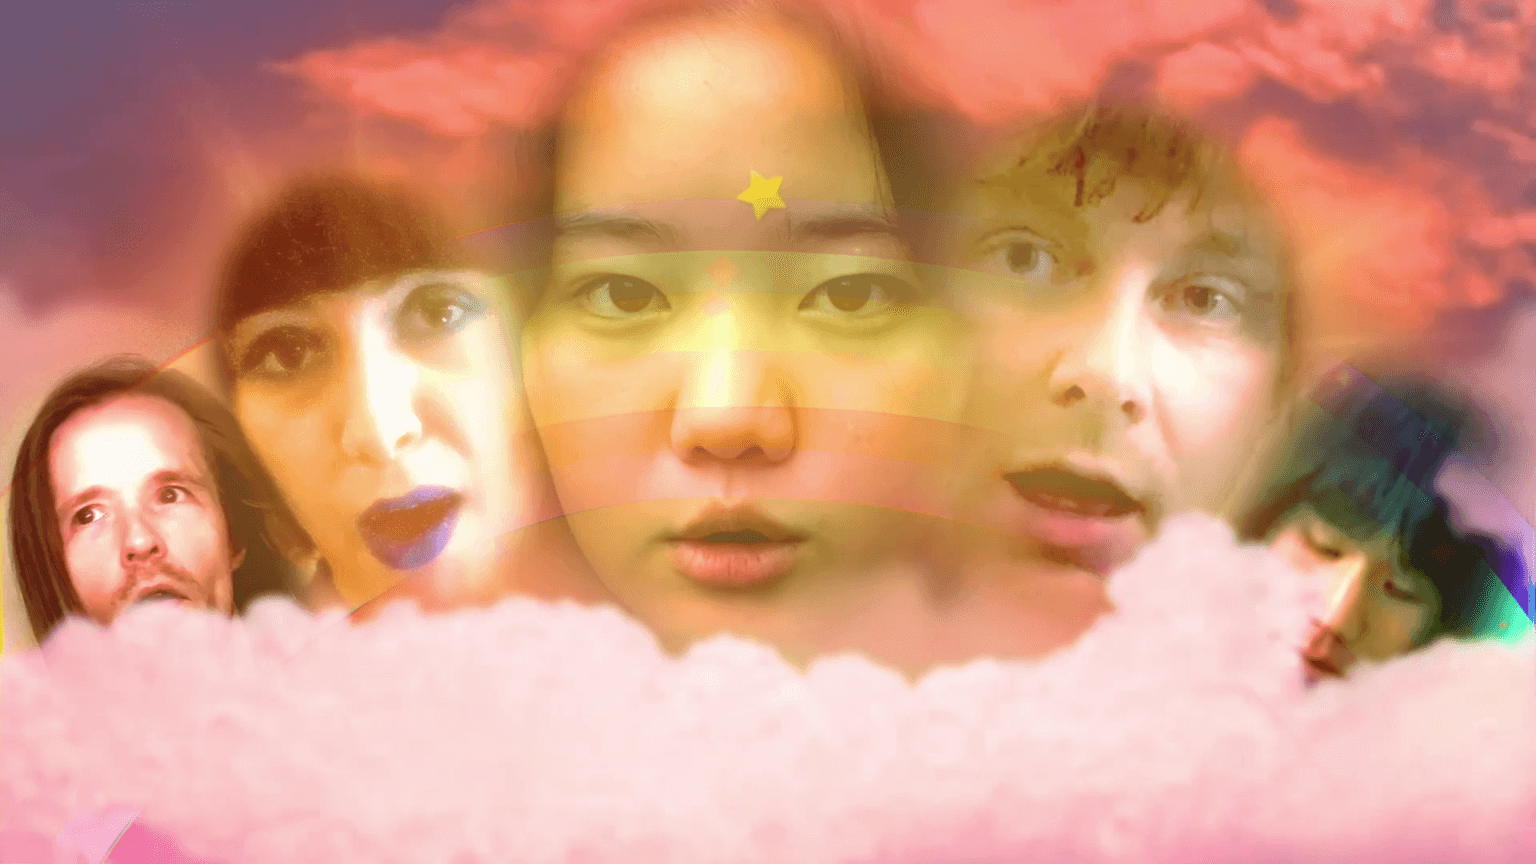 Superorganism release new video for "Solar System"